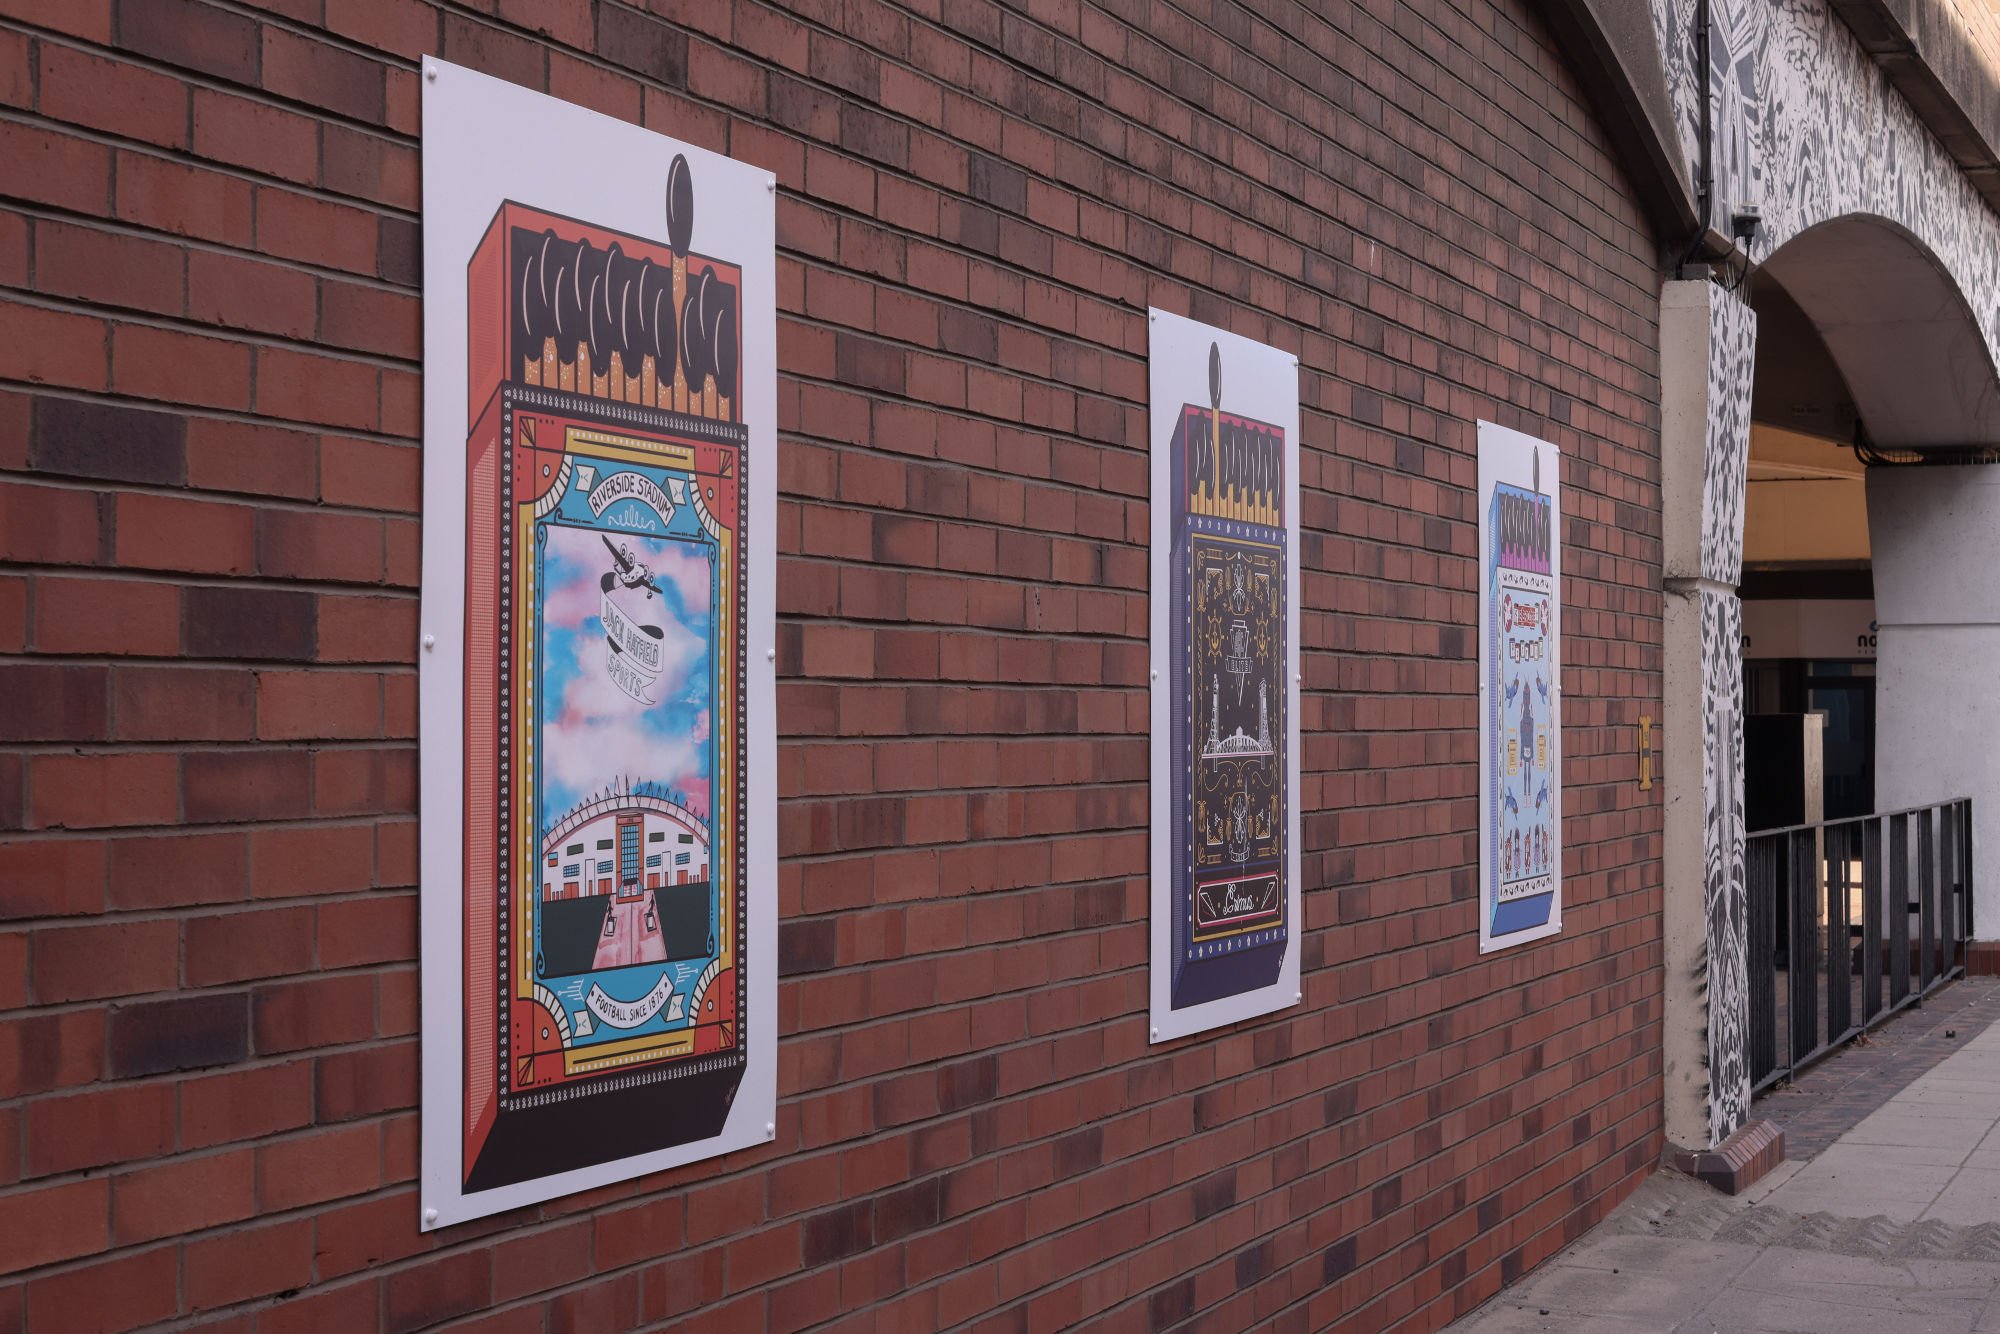 Artwork by Sofia Barton showing colourful images of Middlesbrough drawn on matchstick boxes